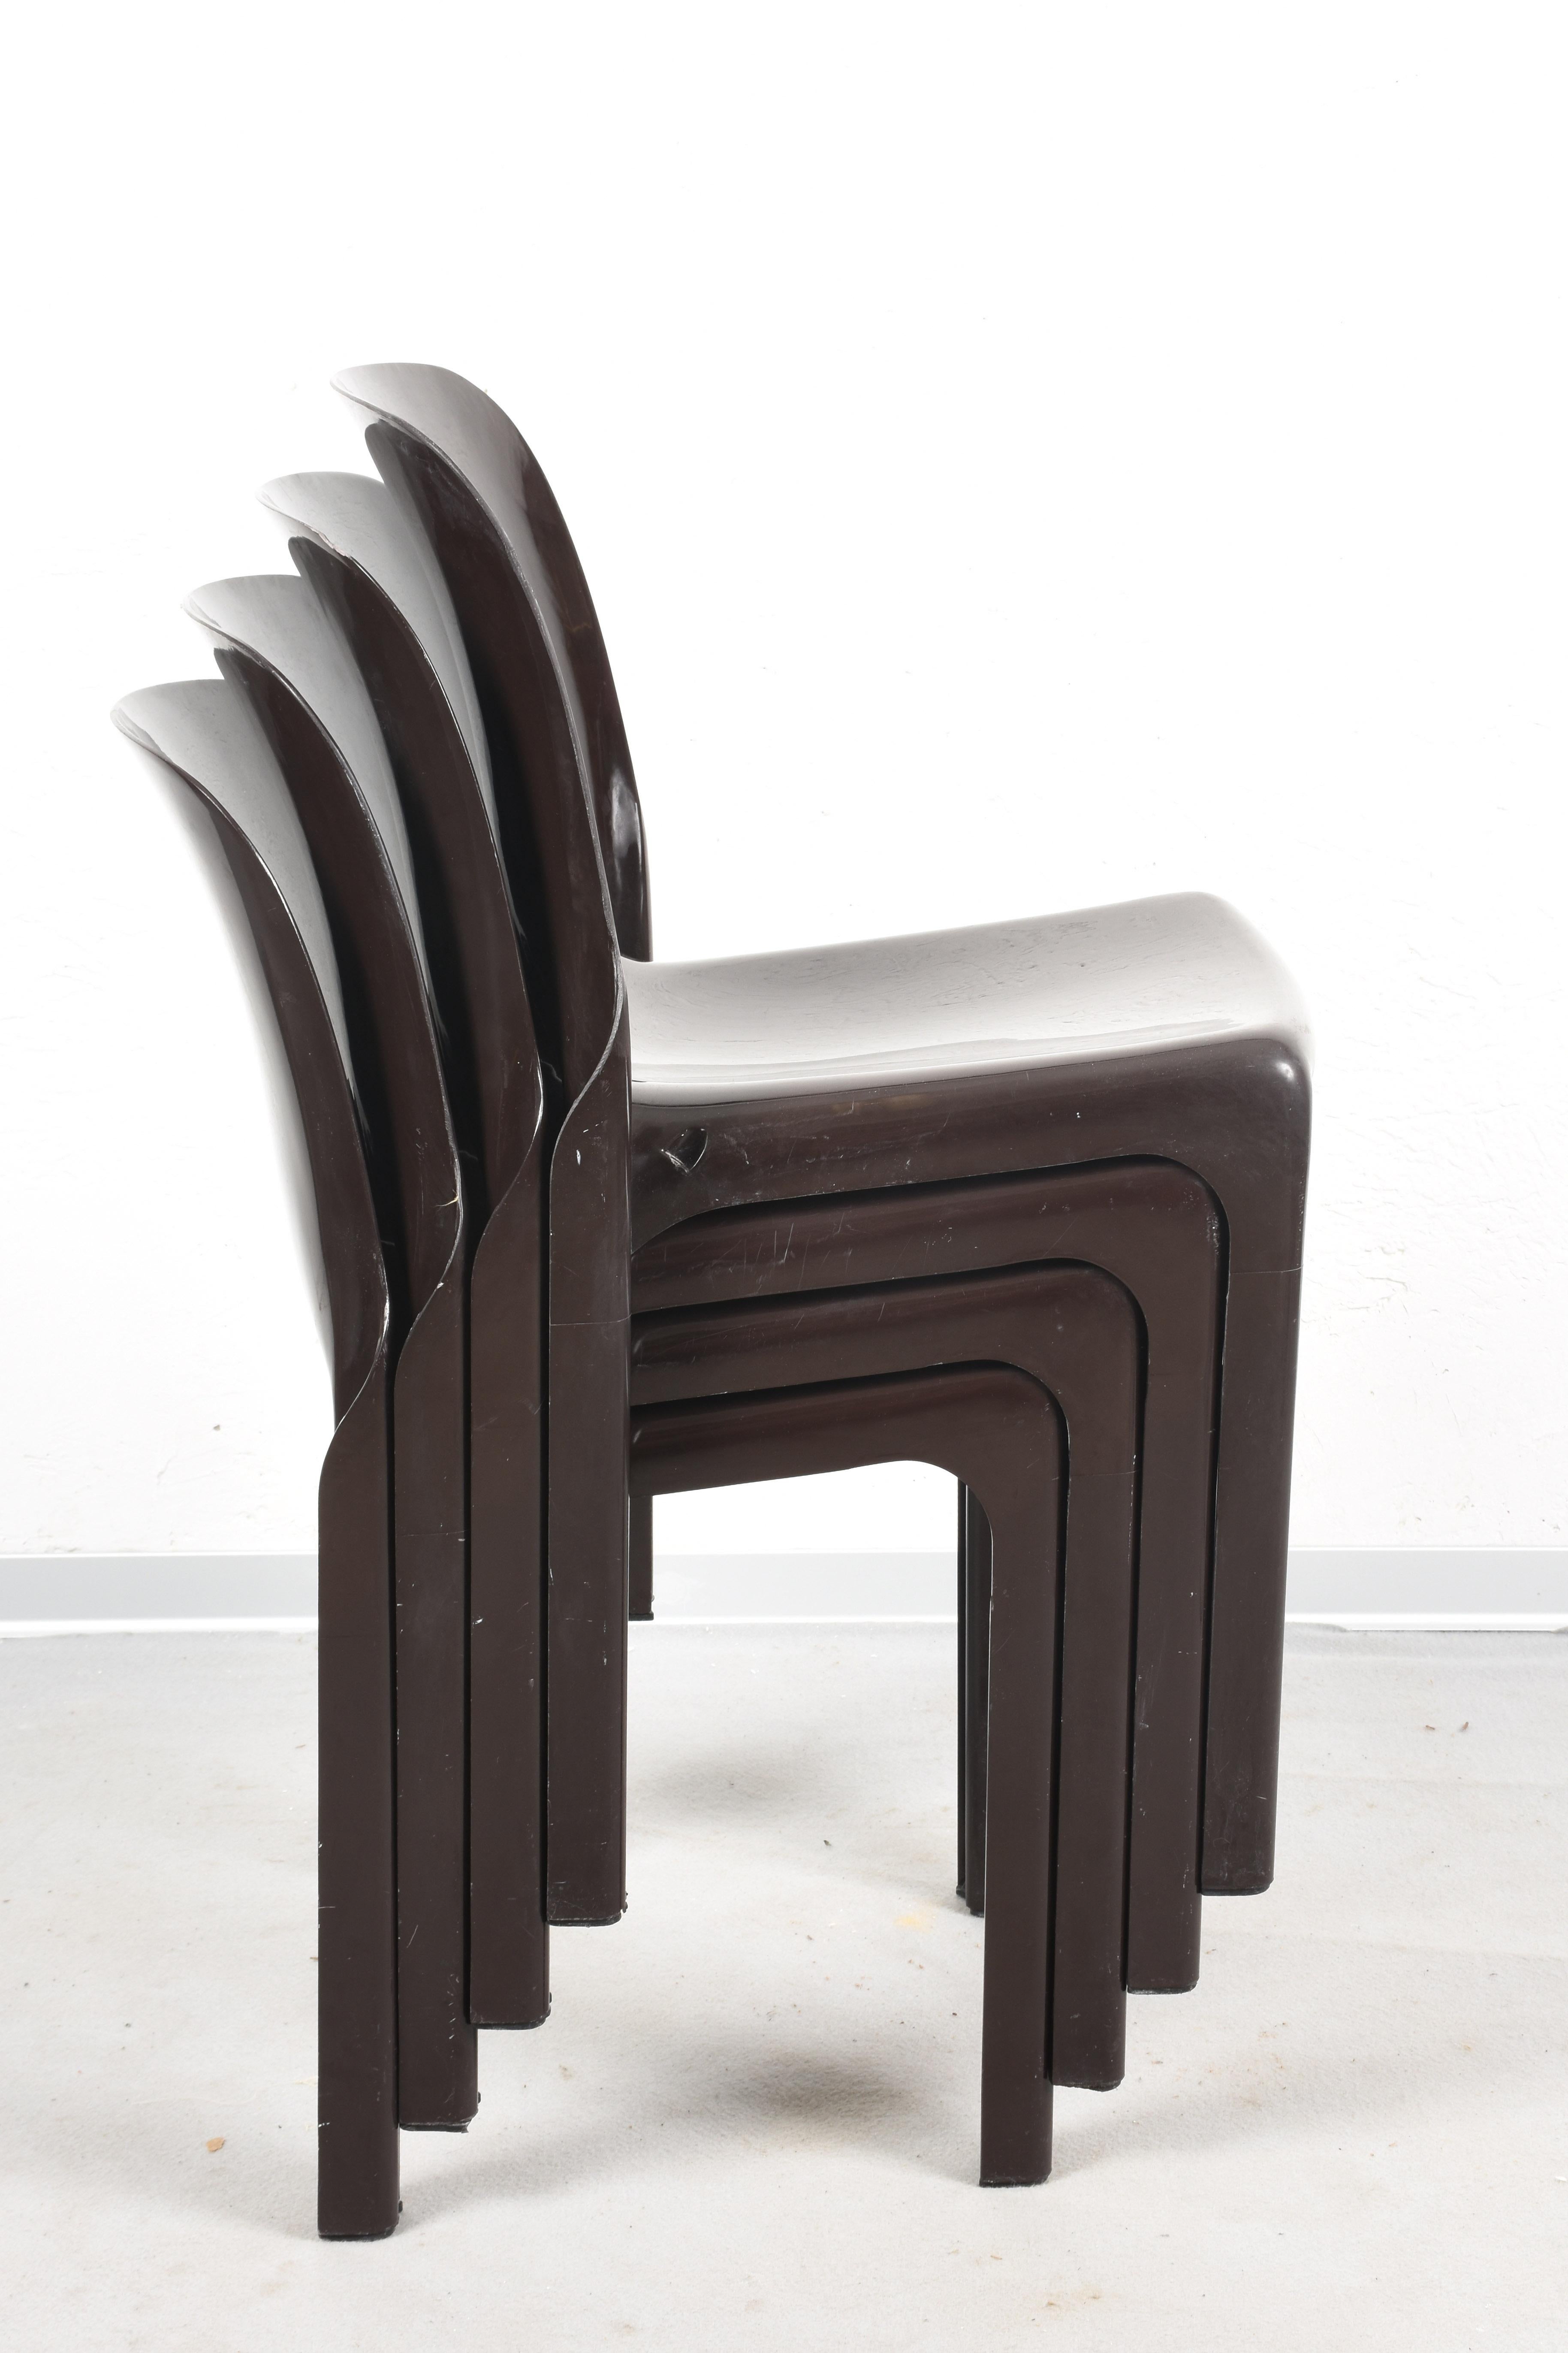 Particular for its color, this chair by Vico Magistretti and realized by Artemide Milano in 1969.
This set of four dark chocolate stackable Selene plastic chairs weighs 4.5 kg per piece.
One of them has a chipping highlighted in the picture.